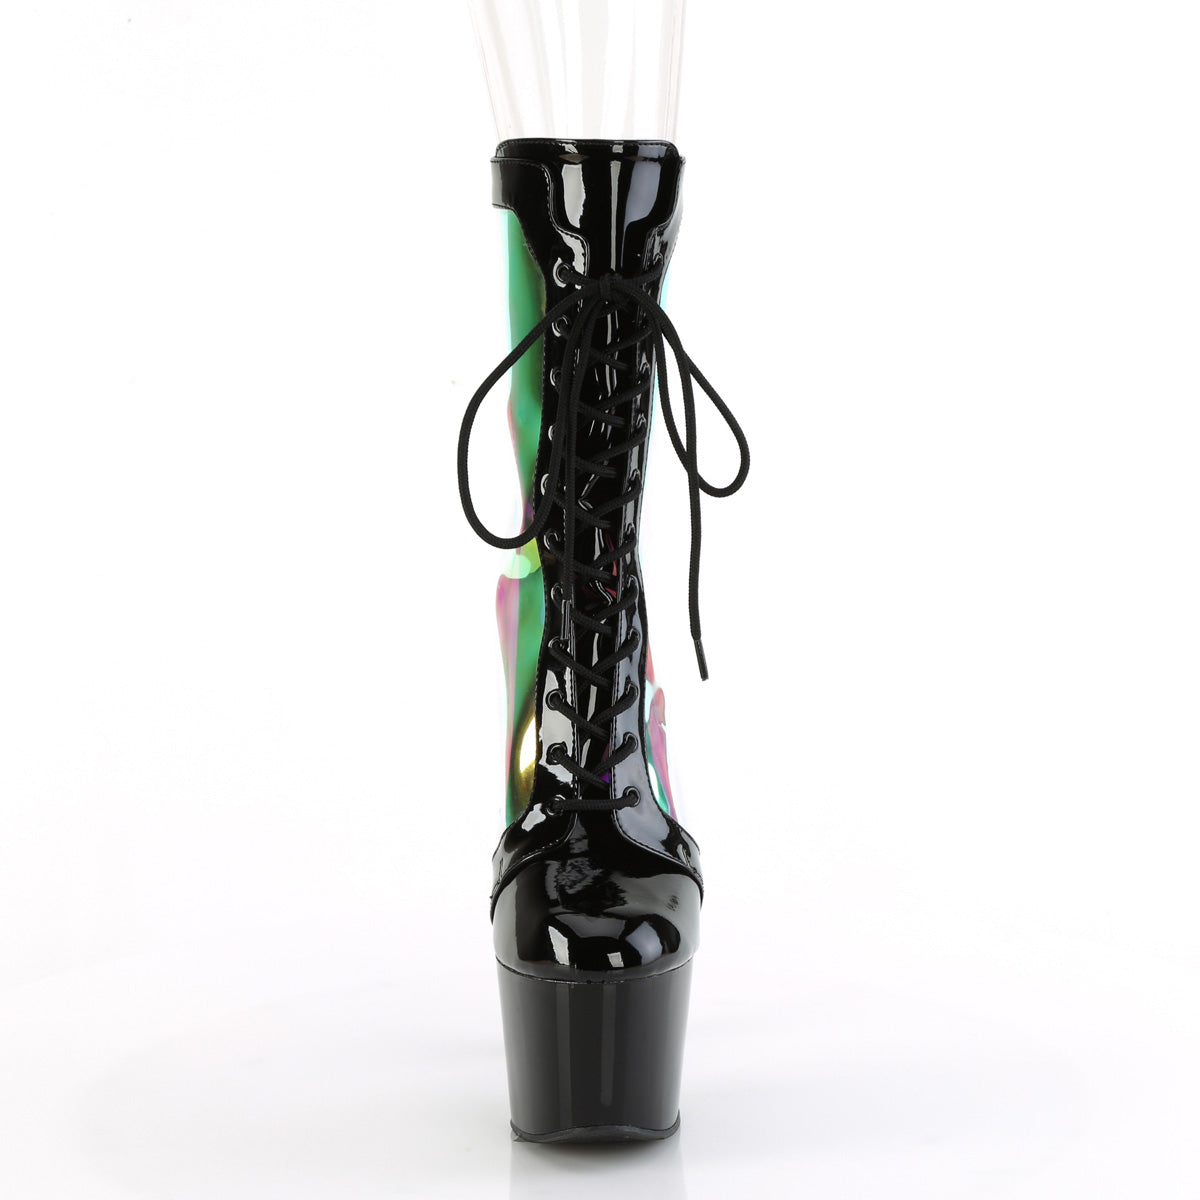 ADORE-1047 Pleaser Sexy Black Holographic Design Lace Up Boots